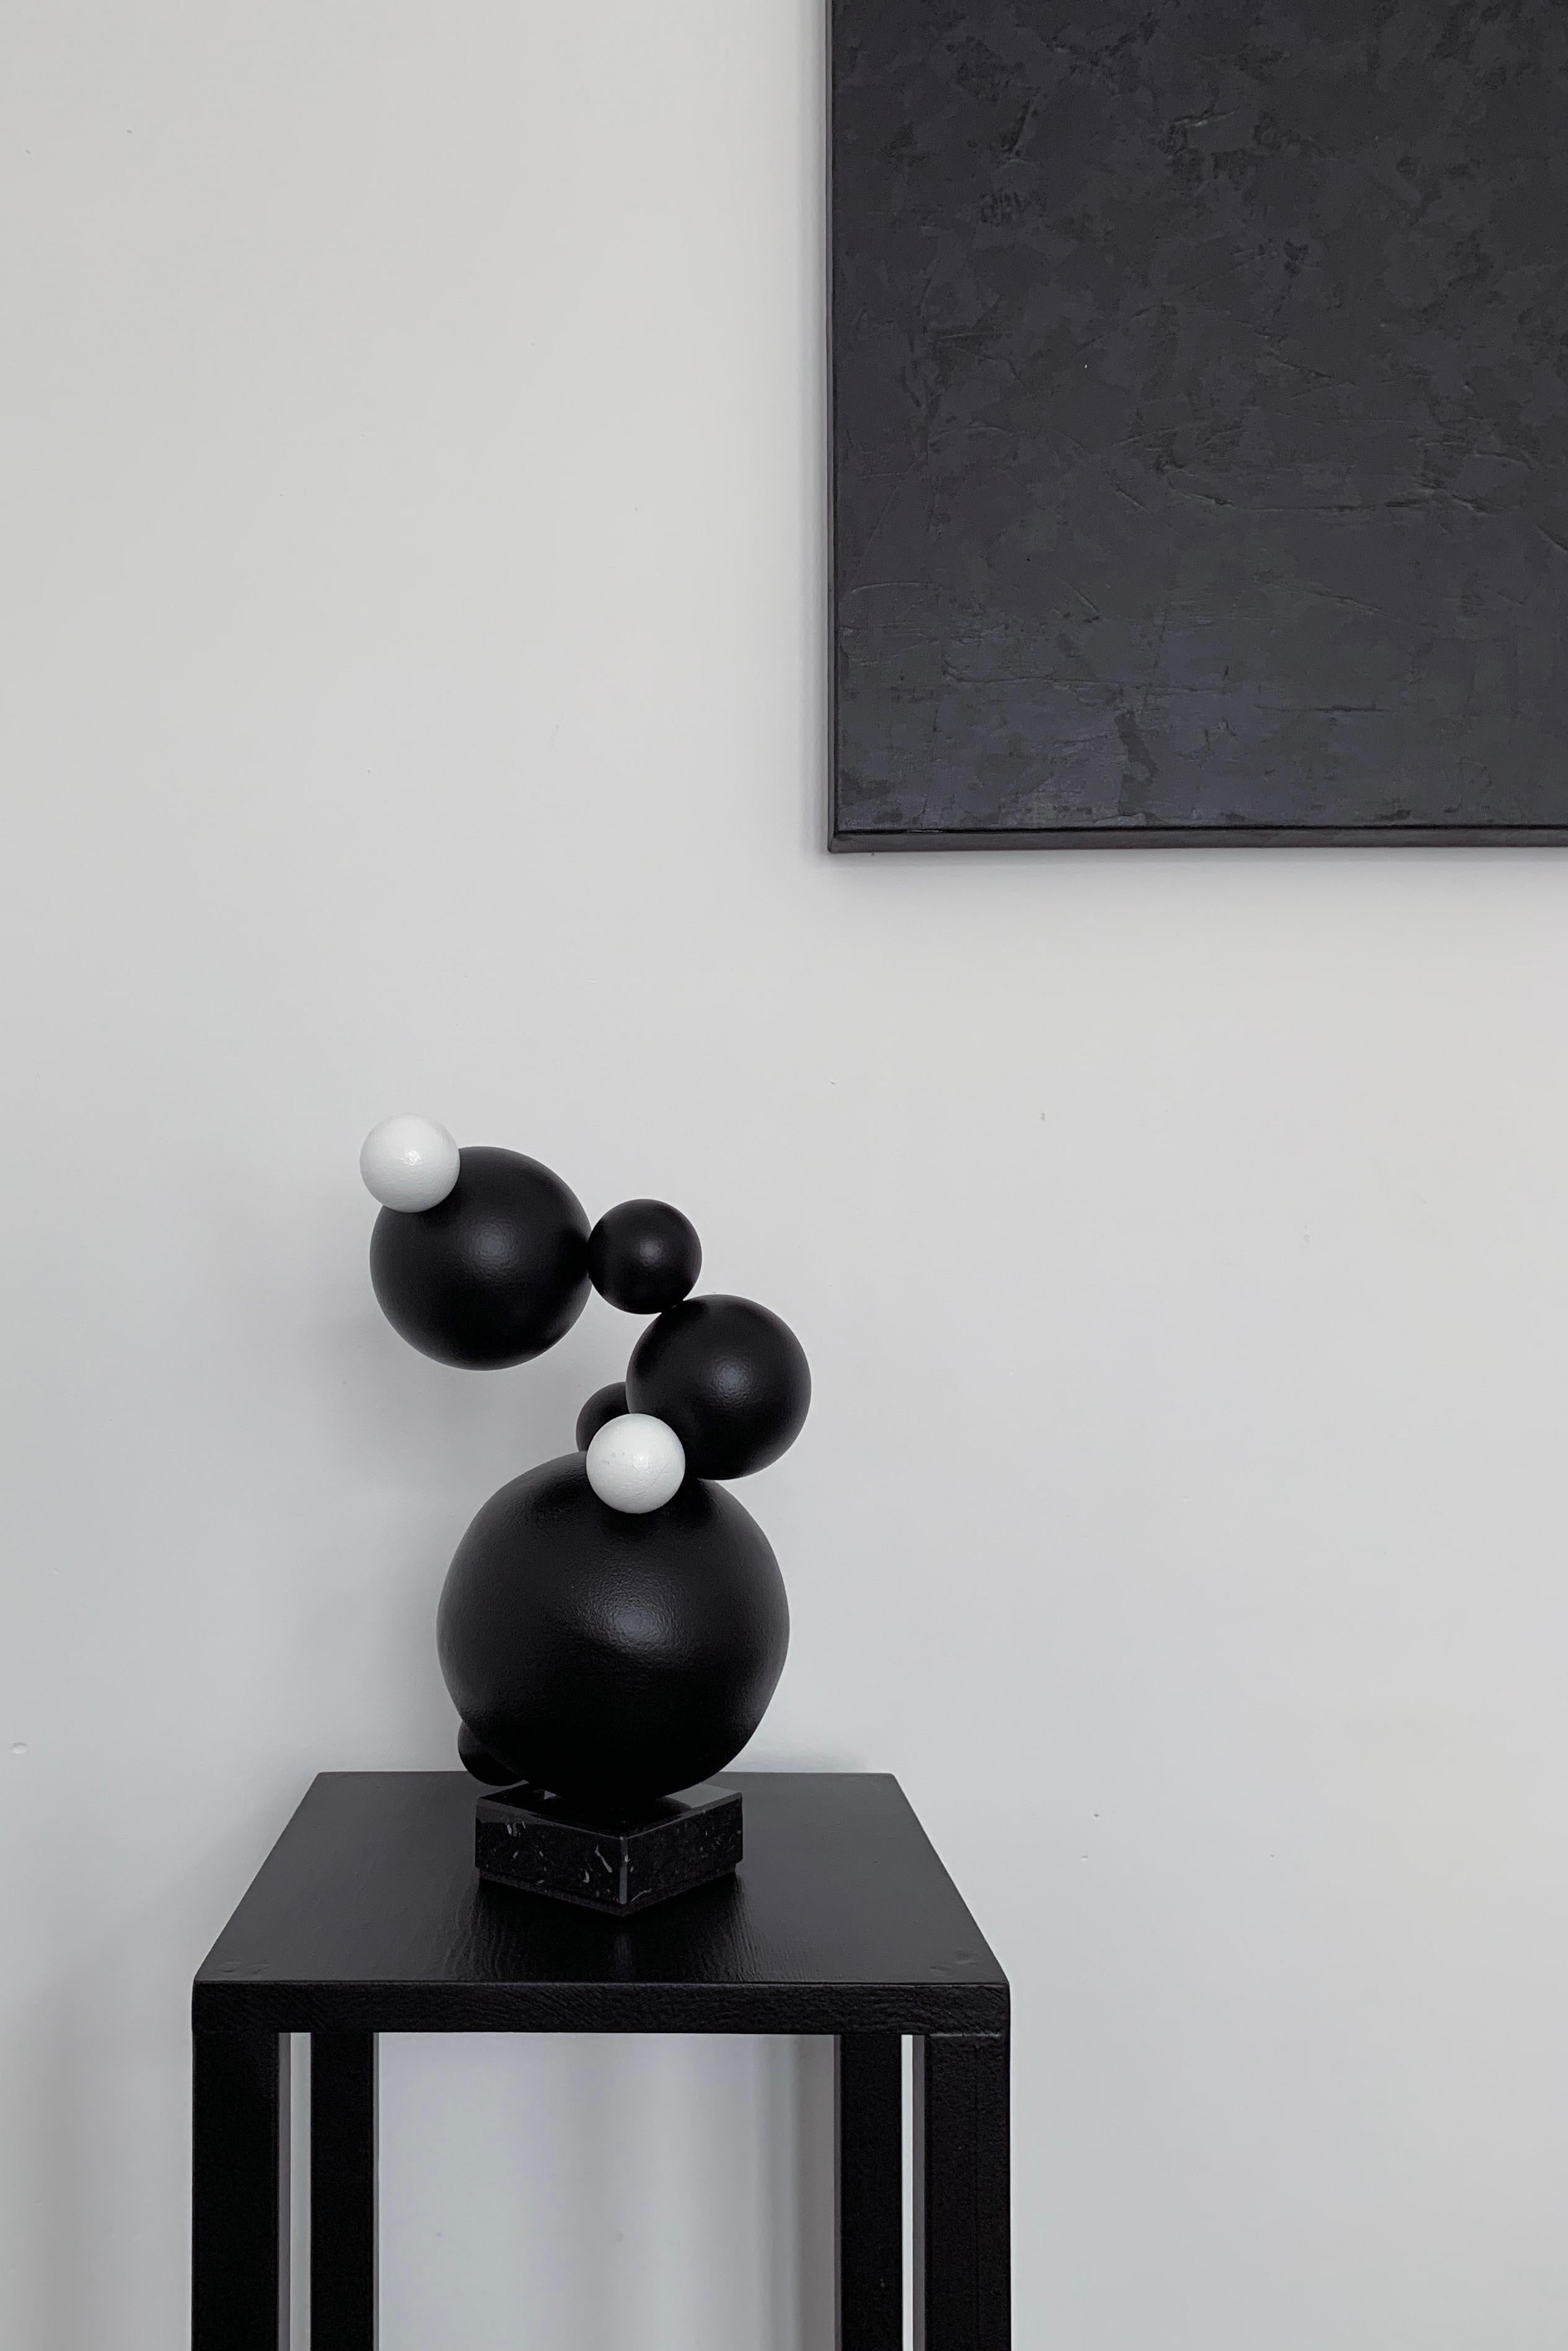 Made in England, 2021.
By Irena Tone and Ros Kozhman.

Steel, acrylic, marble base.

Black. Minimalistic. Abstract. Spheres: from molecules to planets. Look around: mono sphere or billions of small combinations of spheres - this all is our